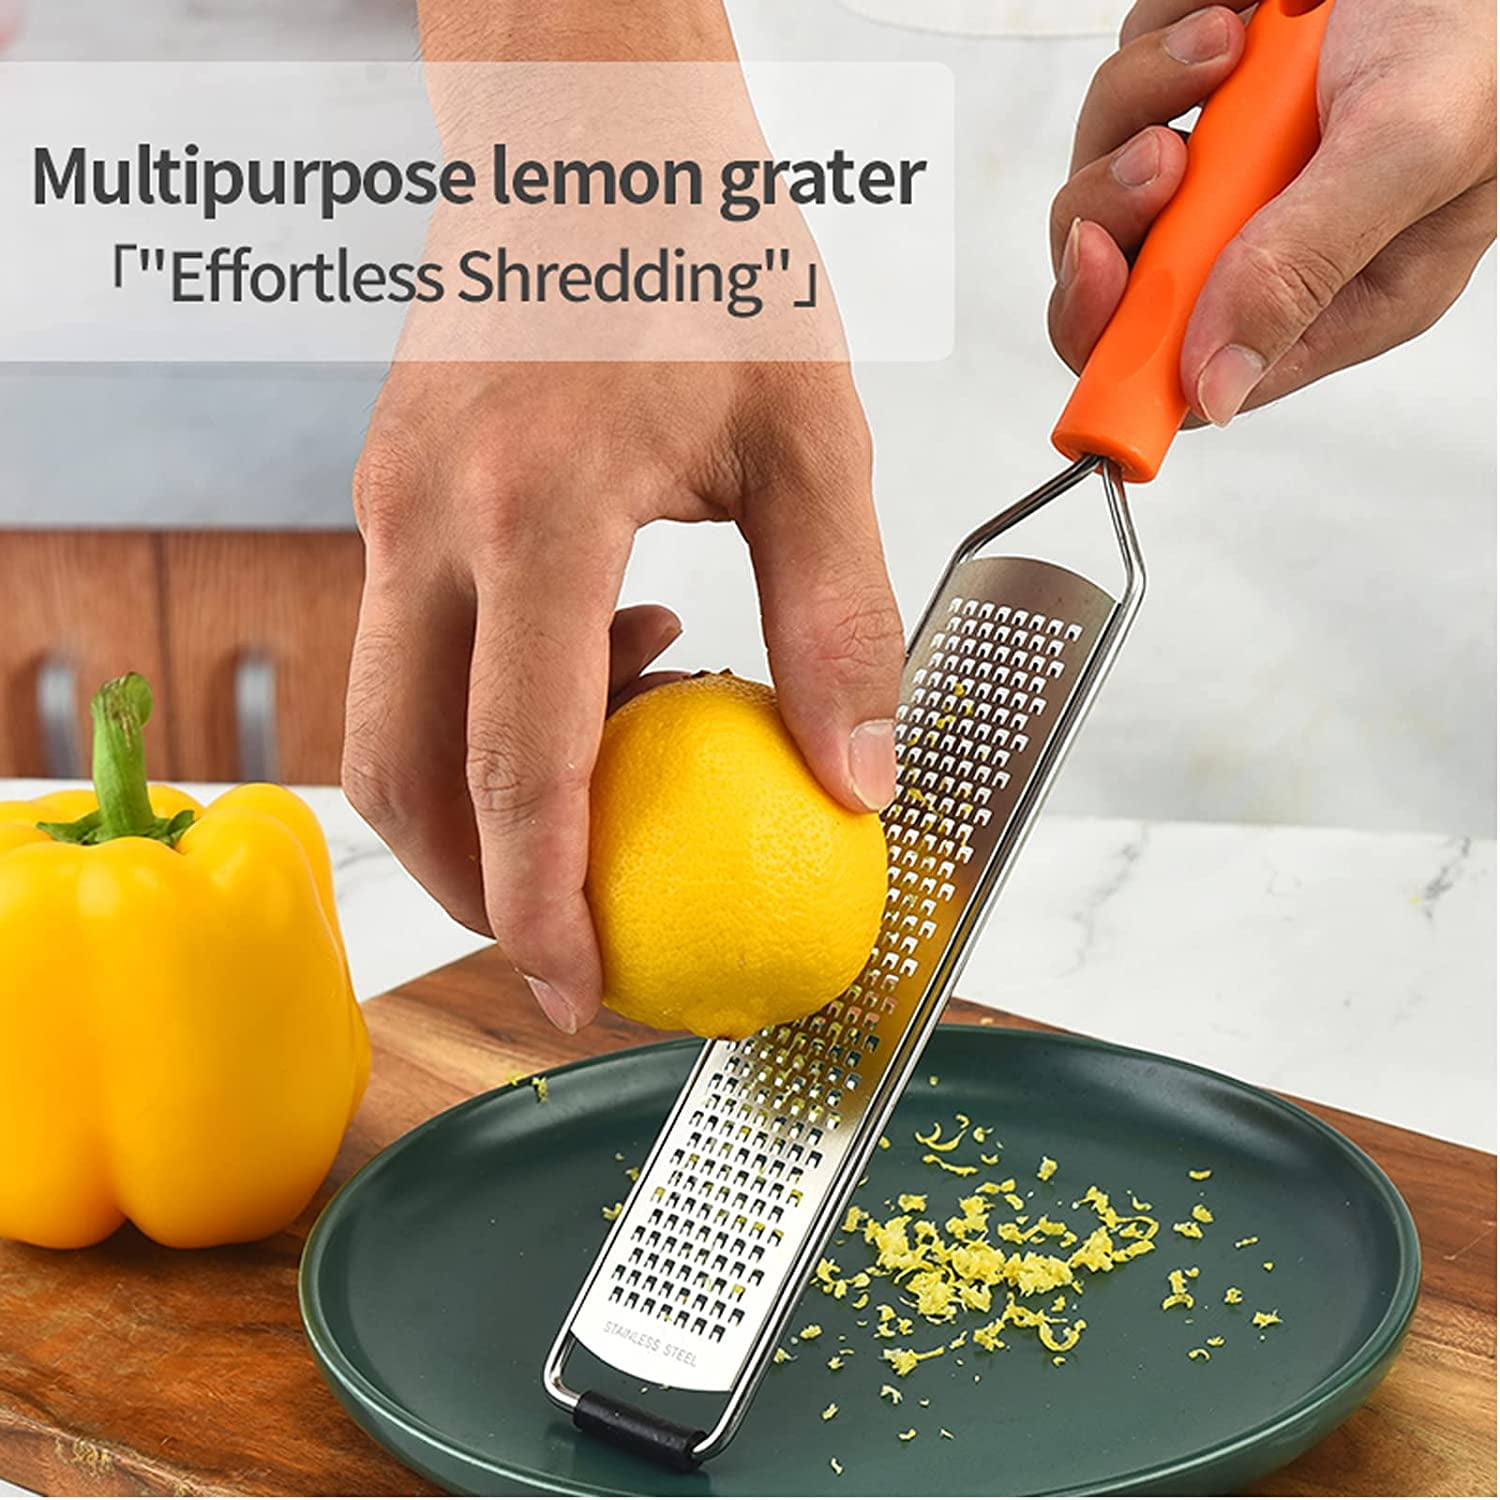  OpenSeseme Handheld Professional Kitchen Grater for Vegetables  and Cheese, Citrus Lemon Zester with Vegetable Peeler (Pink): Home & Kitchen